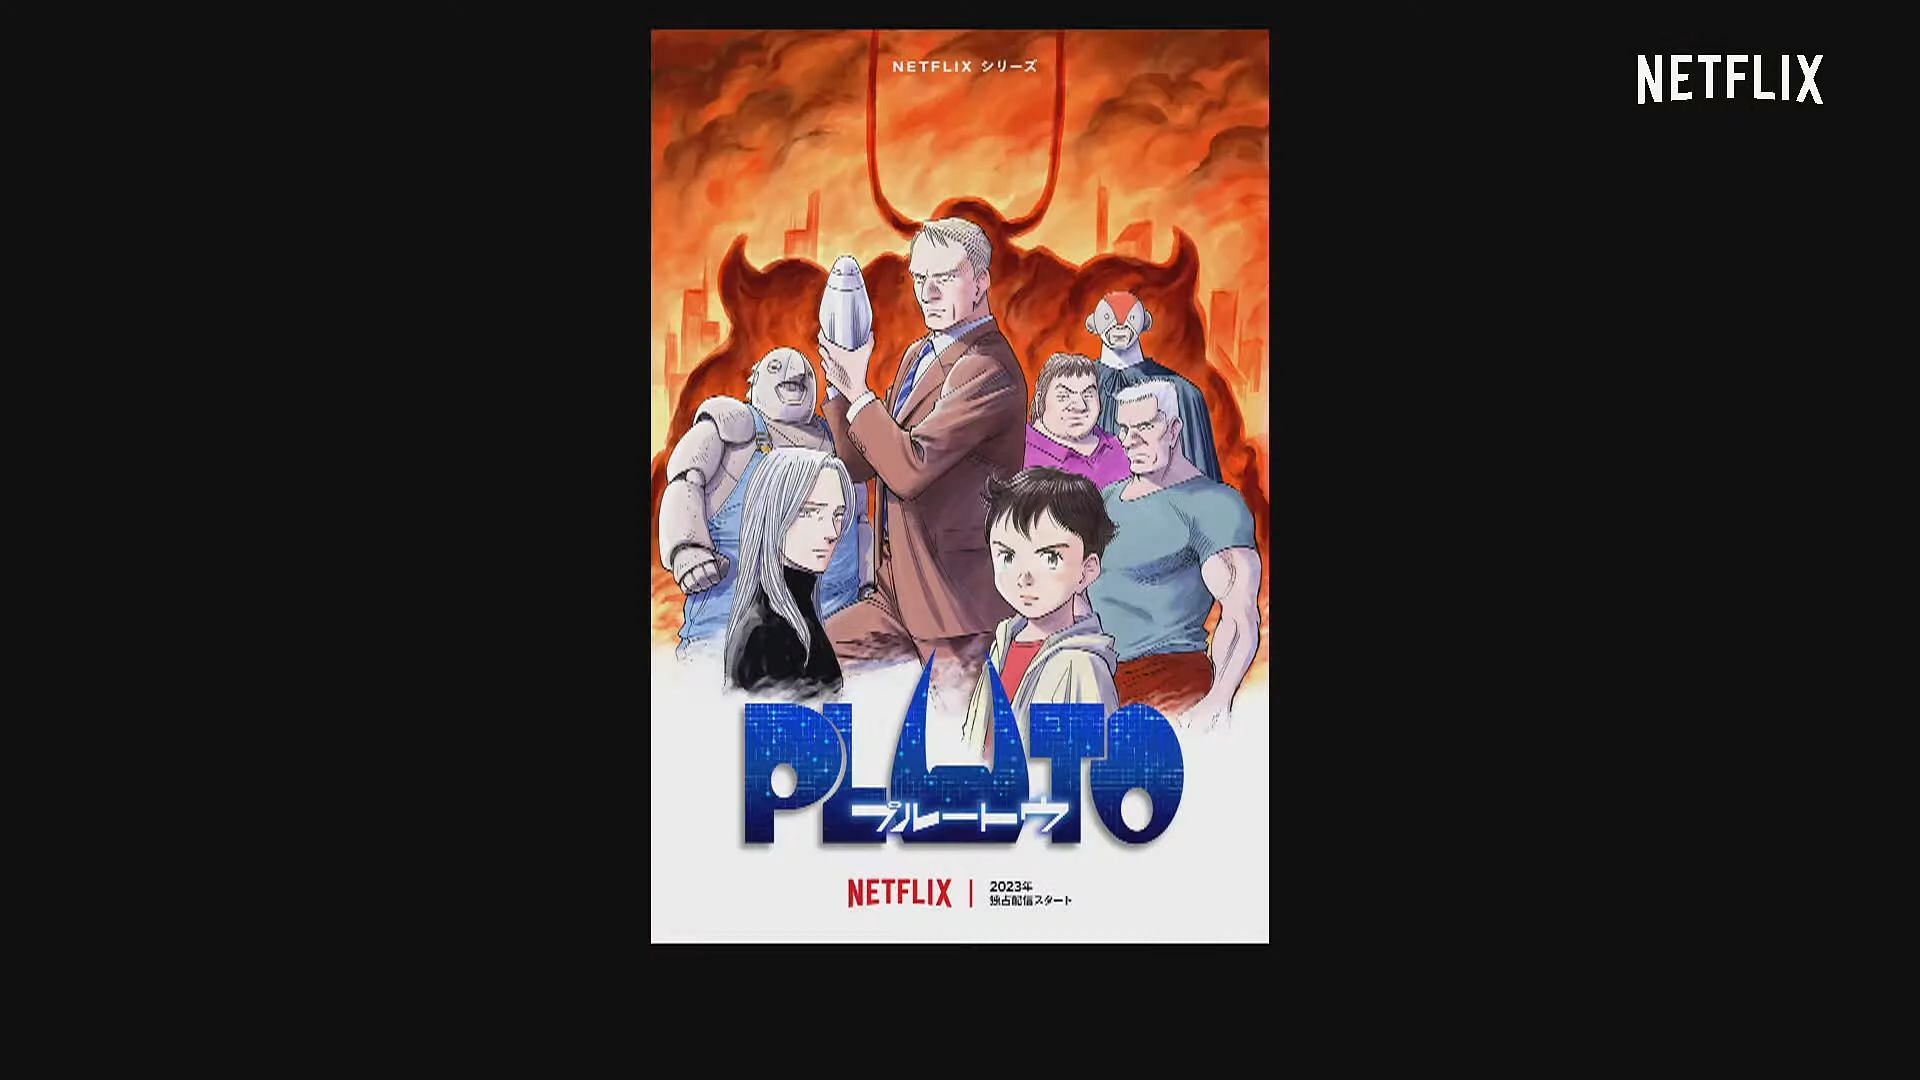 What To Know About The Netflix Anime Based On Japanese Manga Pluto